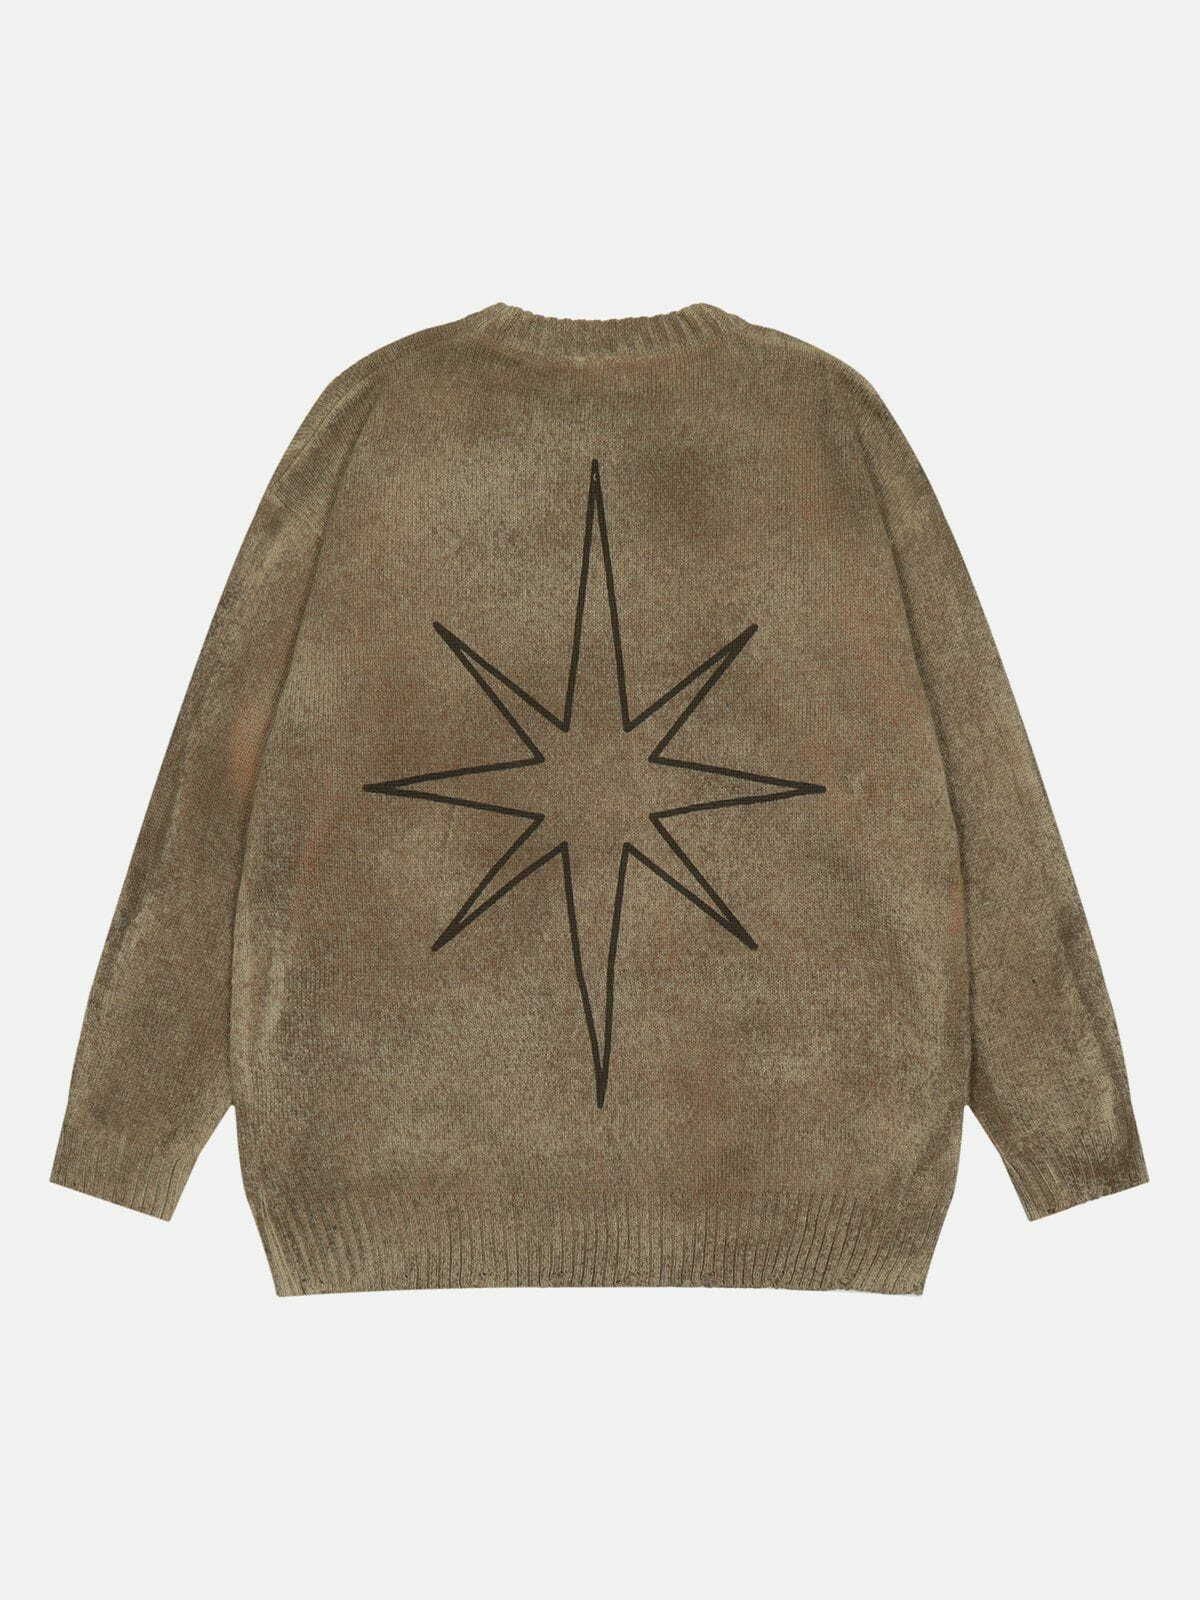 sepia star sweater vintage chic & edgy vibe 7577